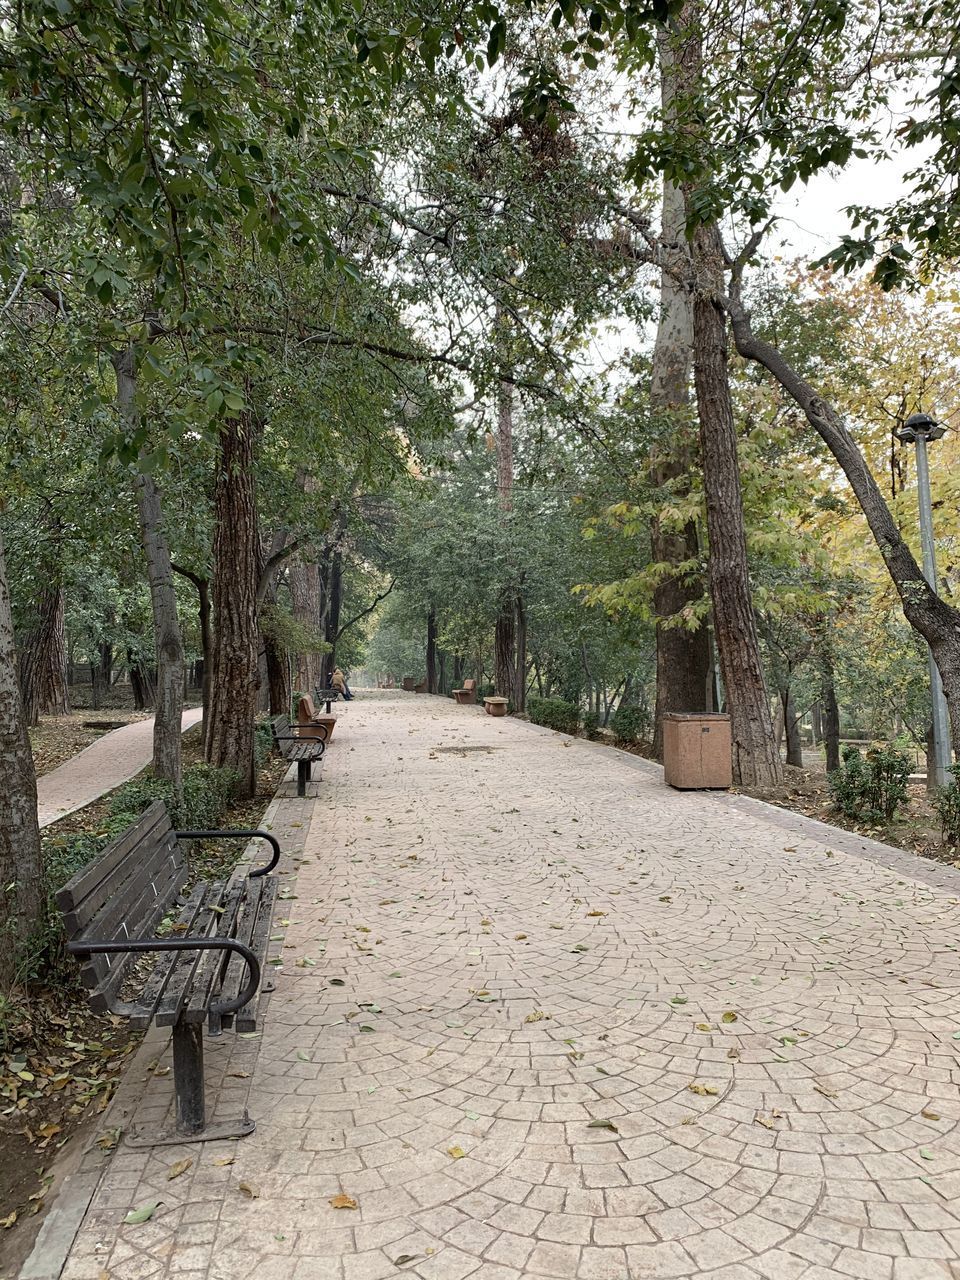 EMPTY FOOTPATH AMIDST TREES